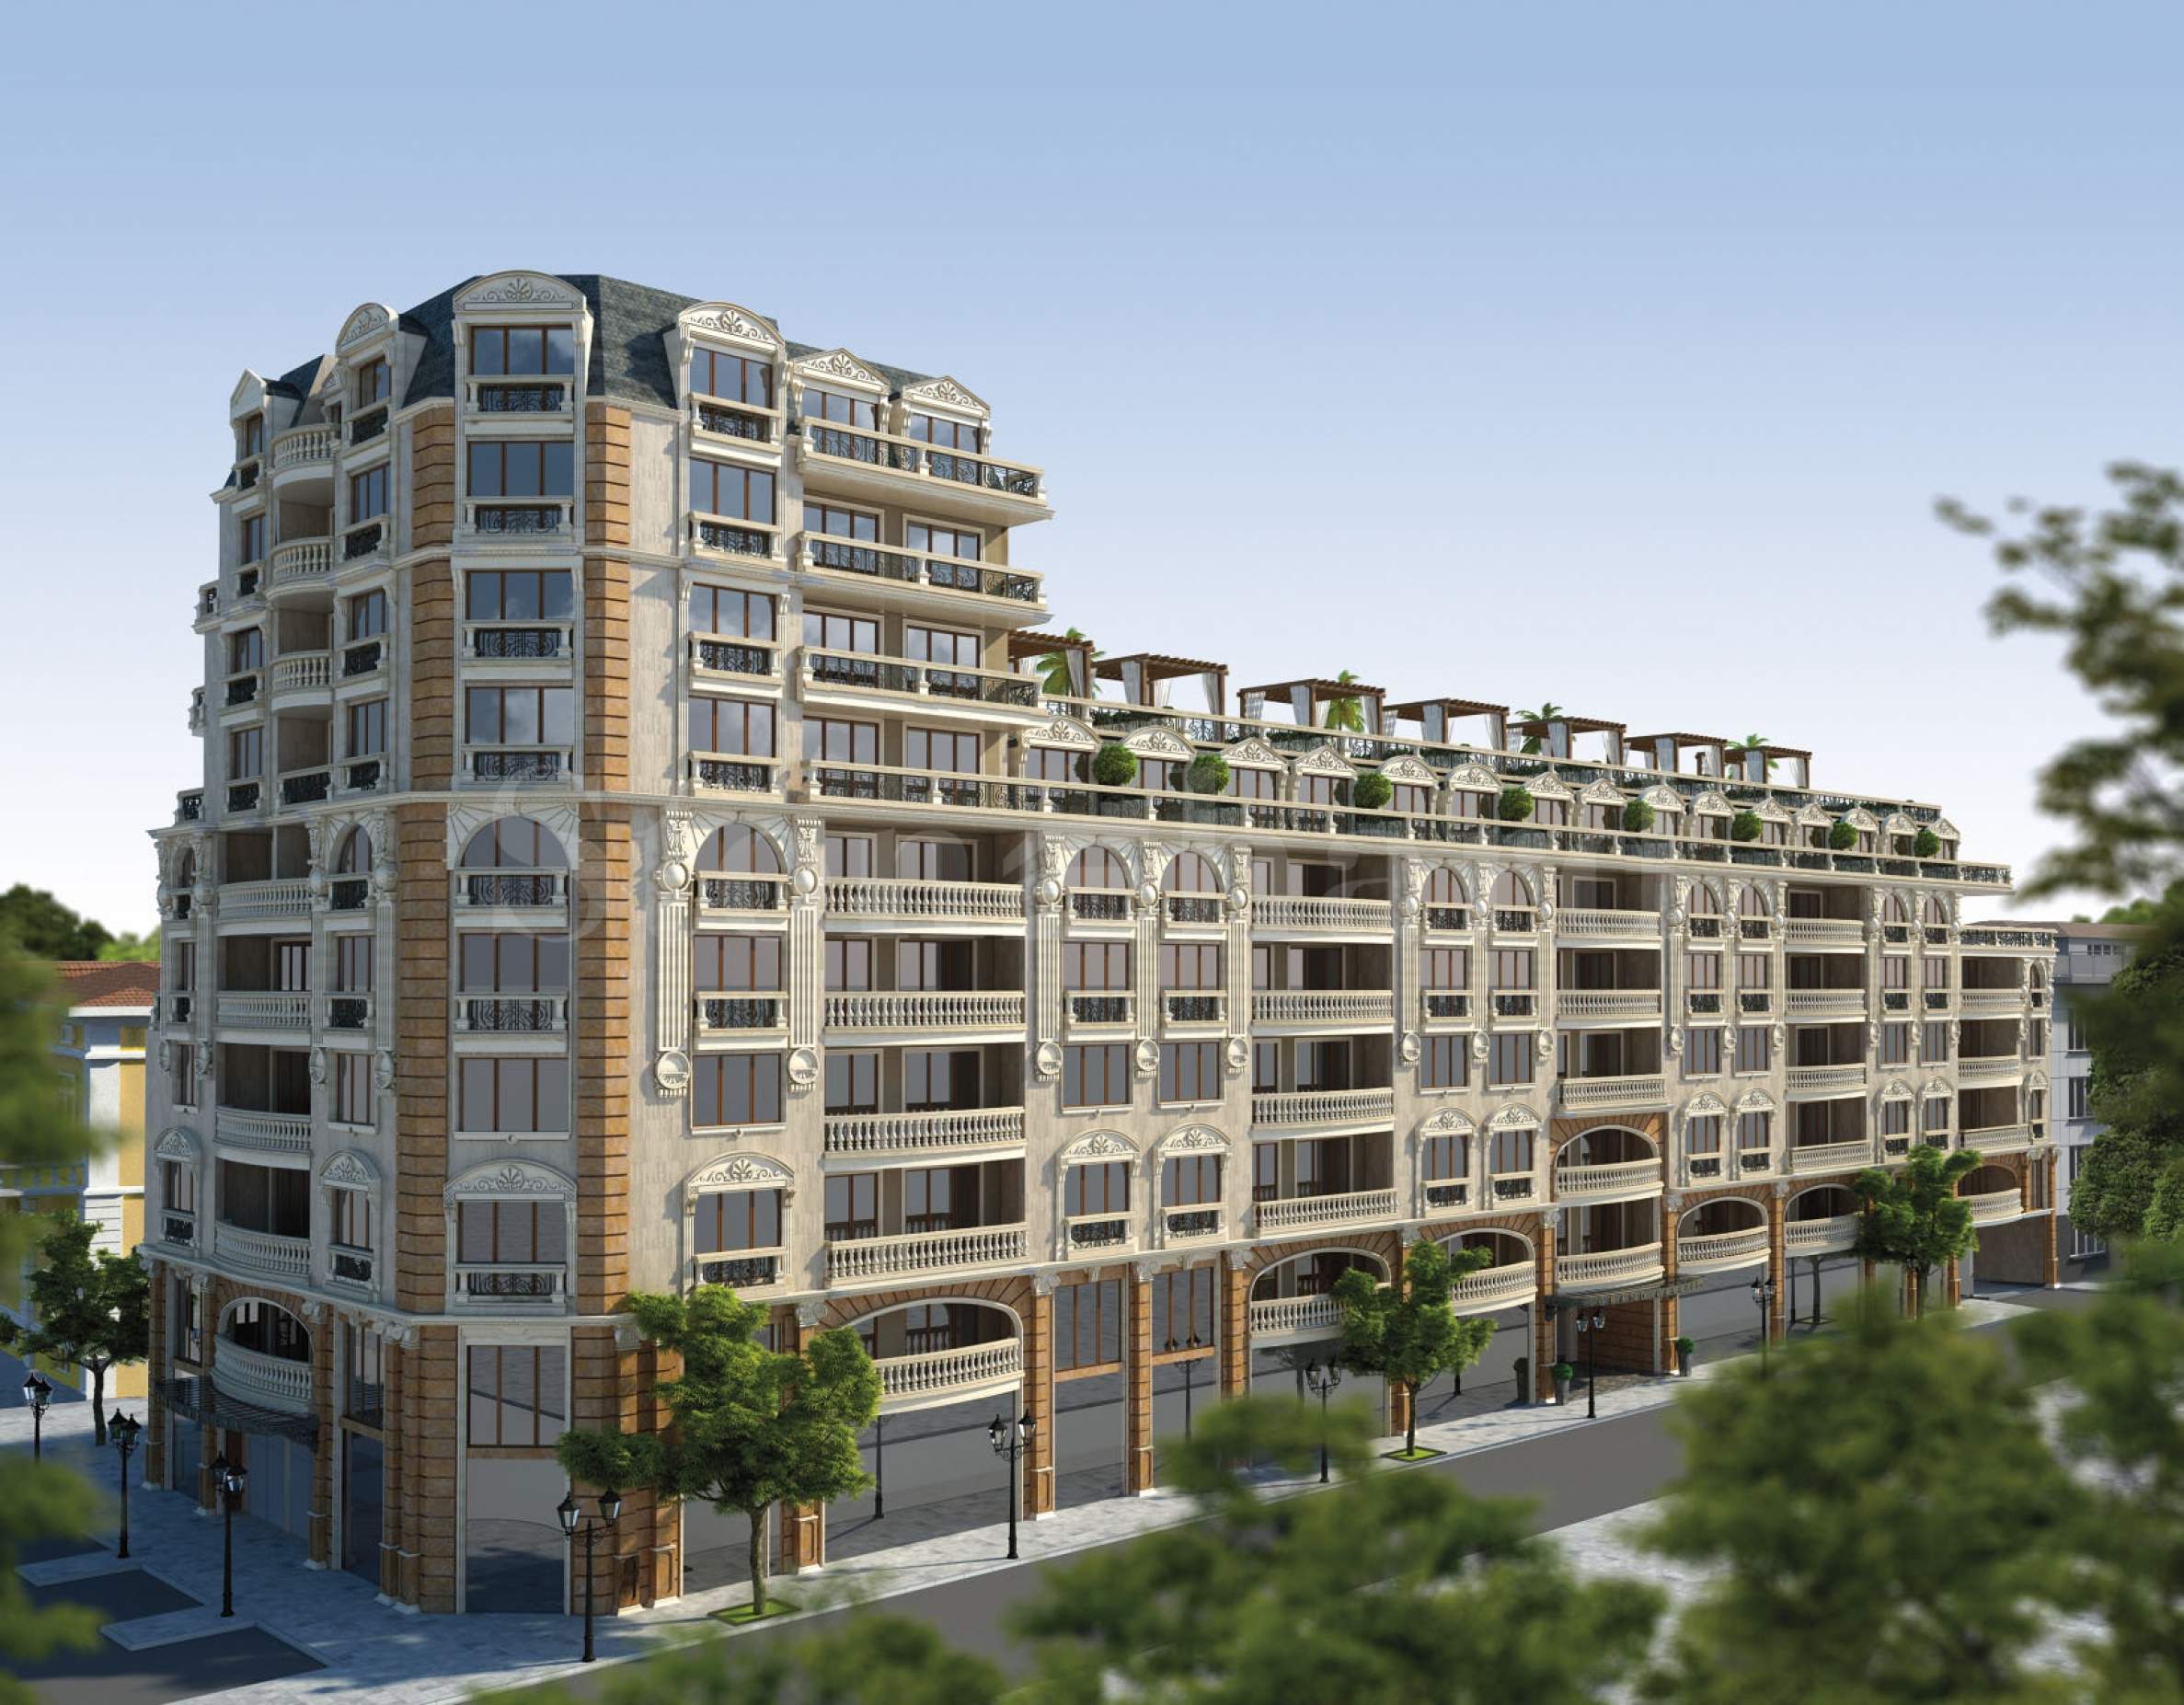 Luxury apartments and offices on the first line2 - Stonehard